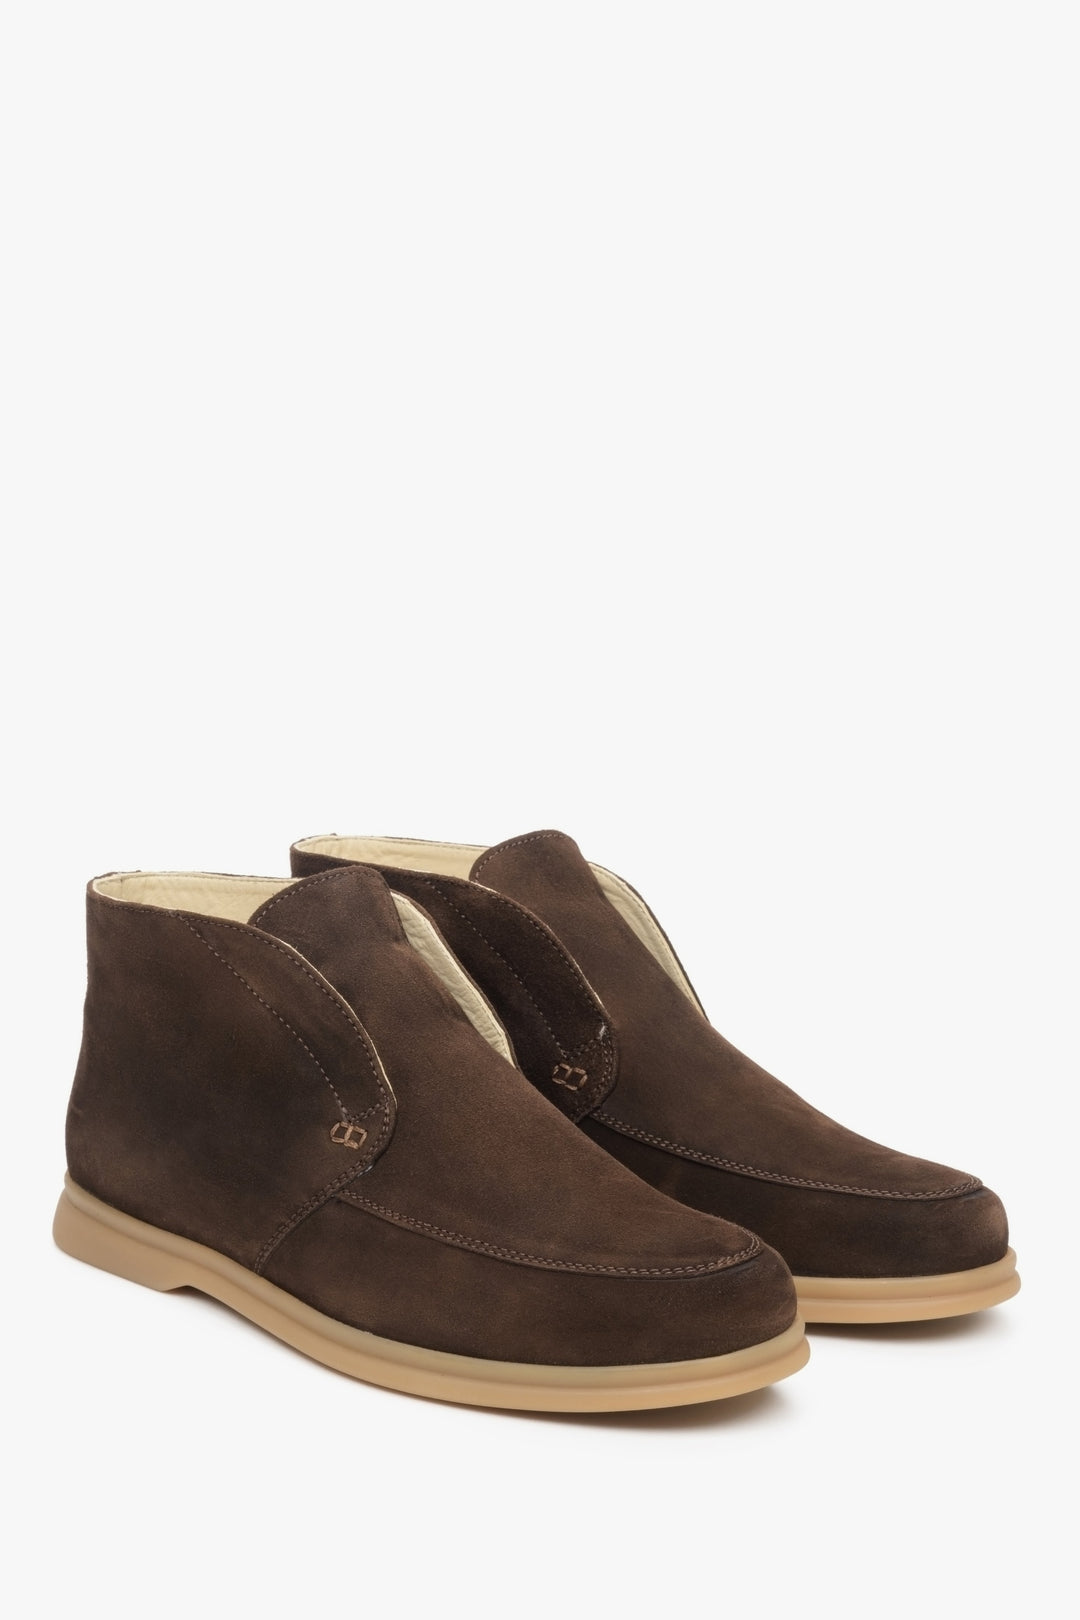 Men's slip-on brown suede ankle boots by Estro - view of the front and side of the shoe.